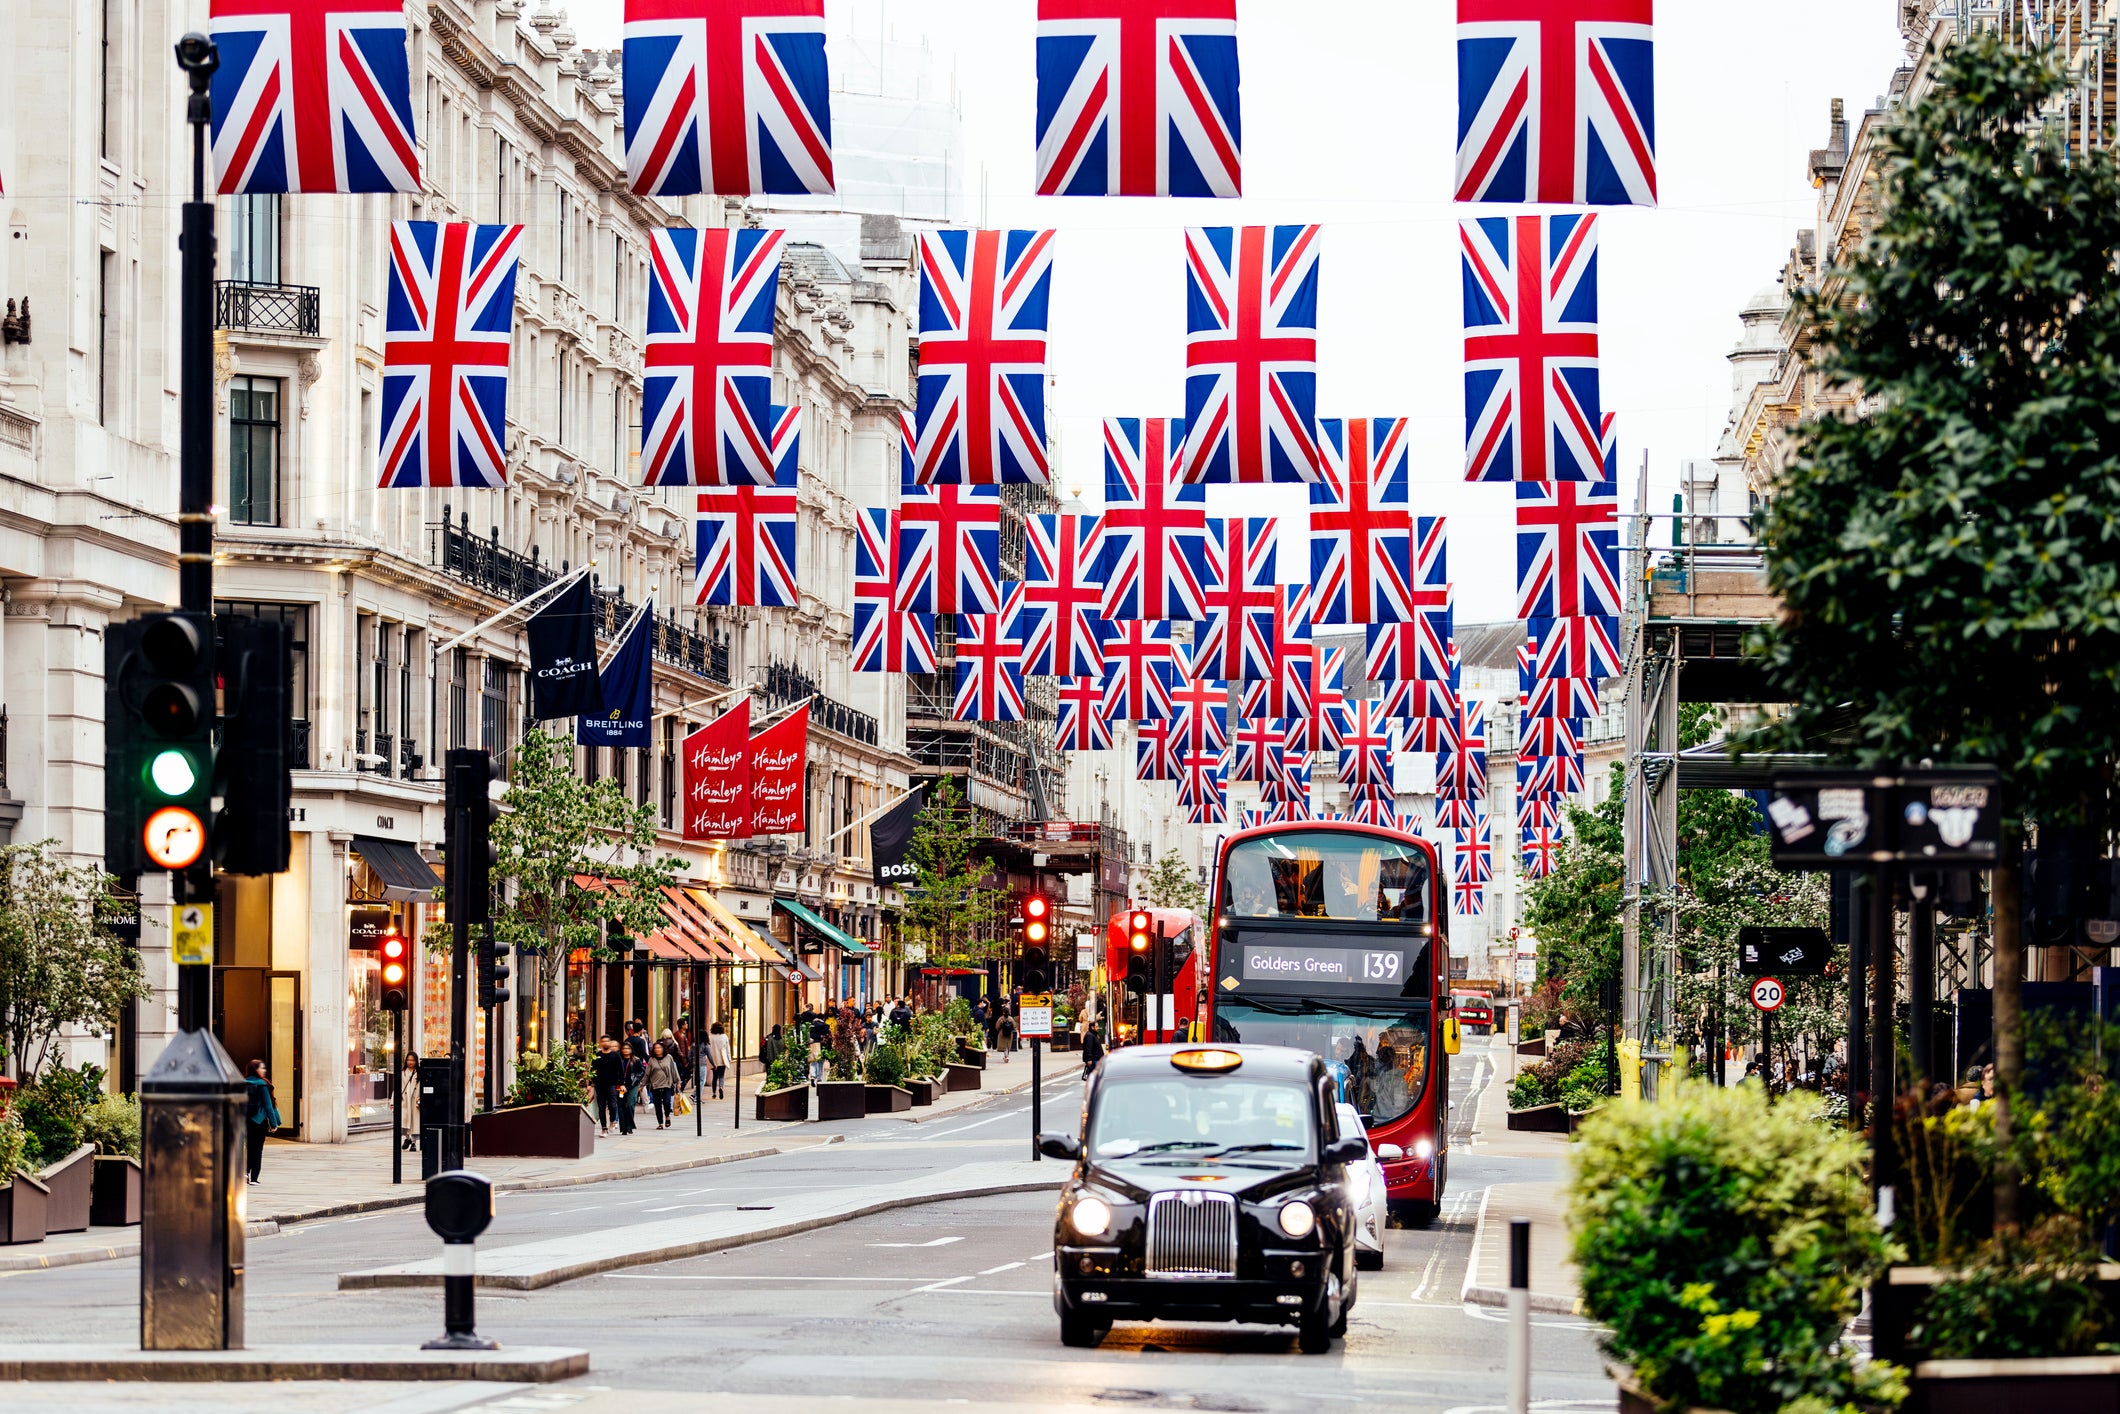 london day trips from heathrow